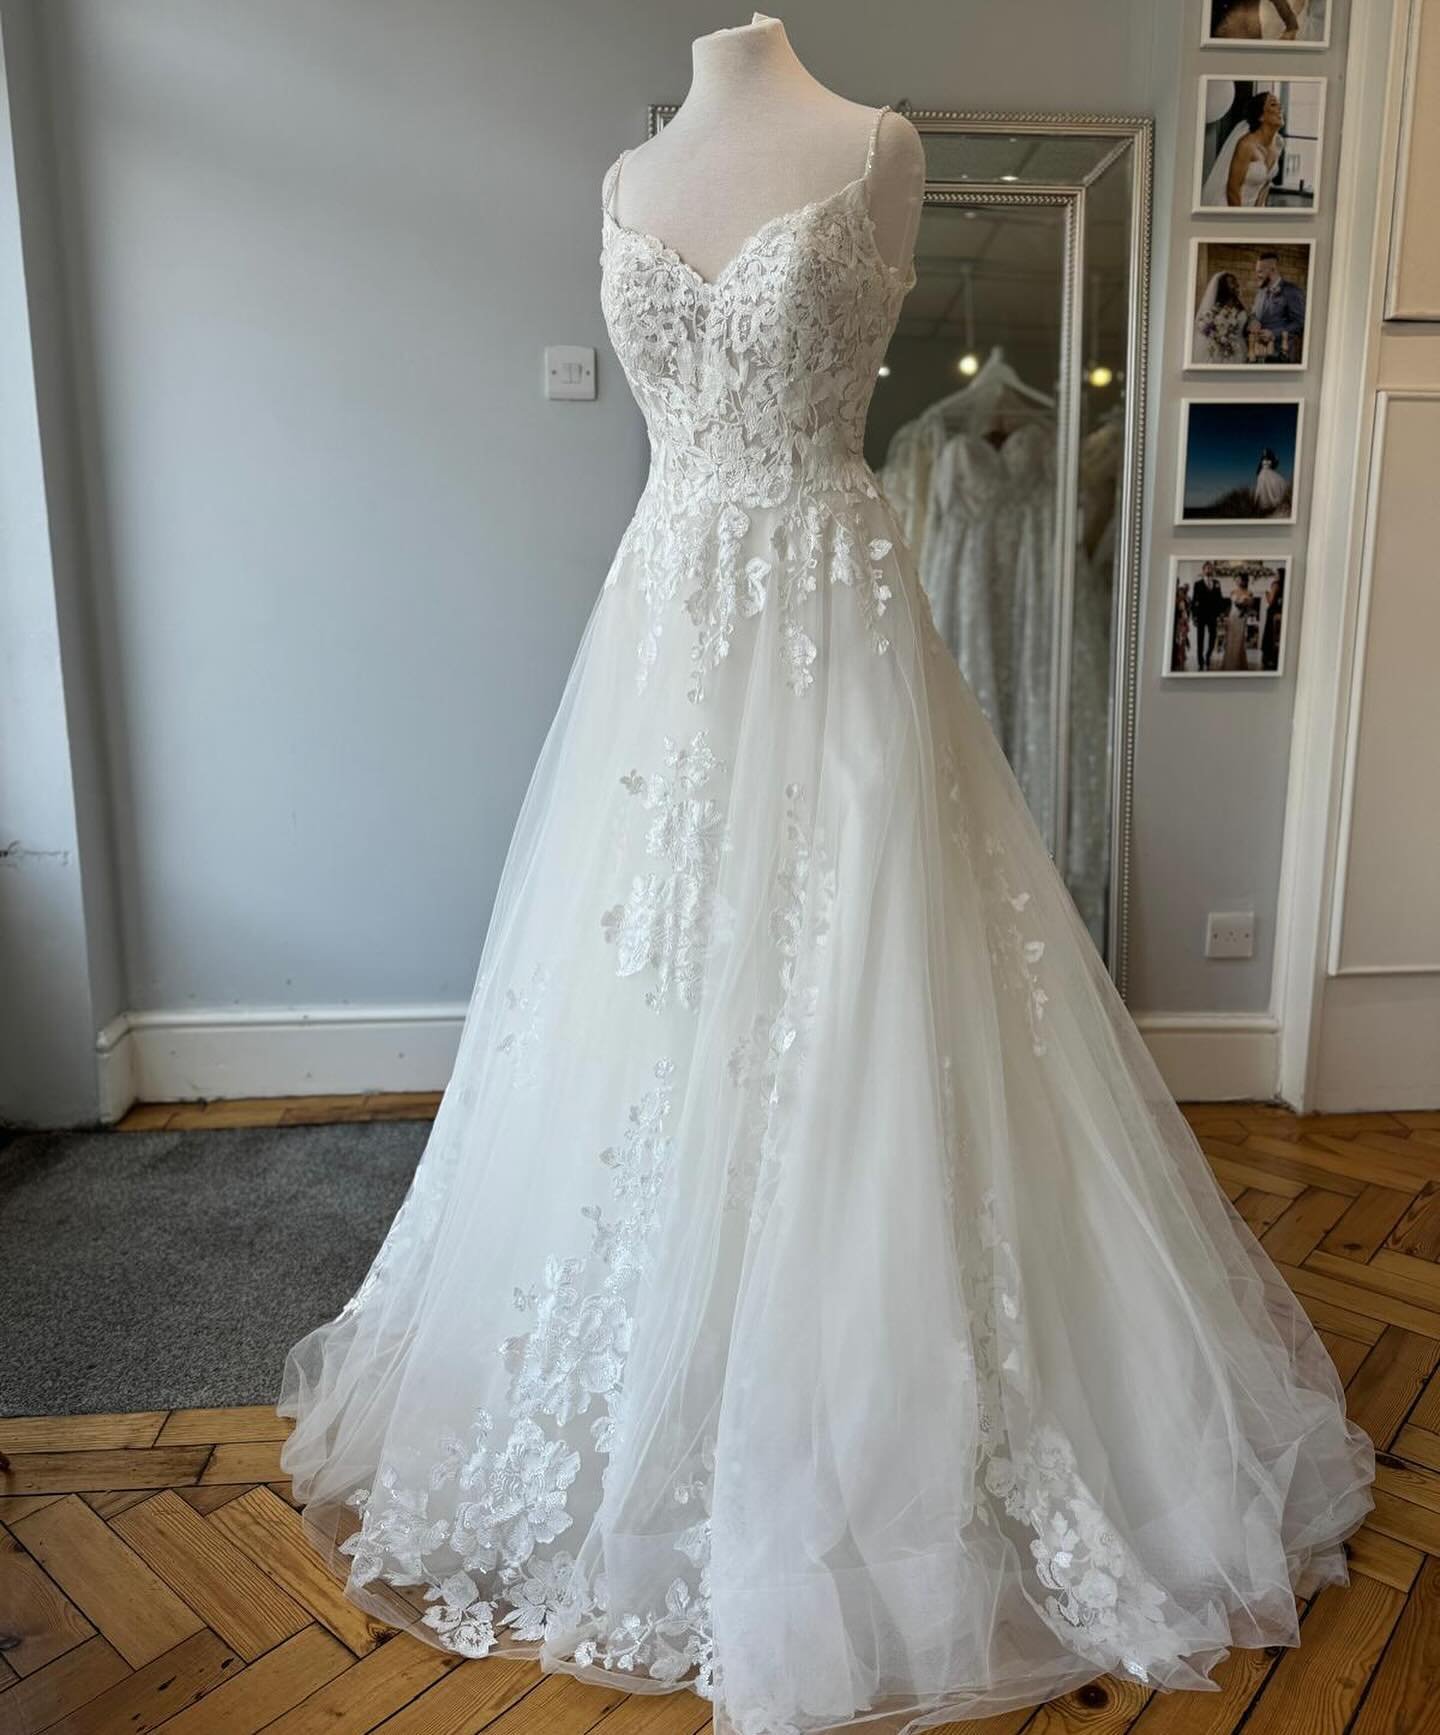 This beauty has a soft sweetheart neckline, delicate beaded straps and an open scoop back. The floral lace leads from the bodice onto the aline skirt for a romantic yet modern finish!

Designer - Essense of Australia

Size - 14